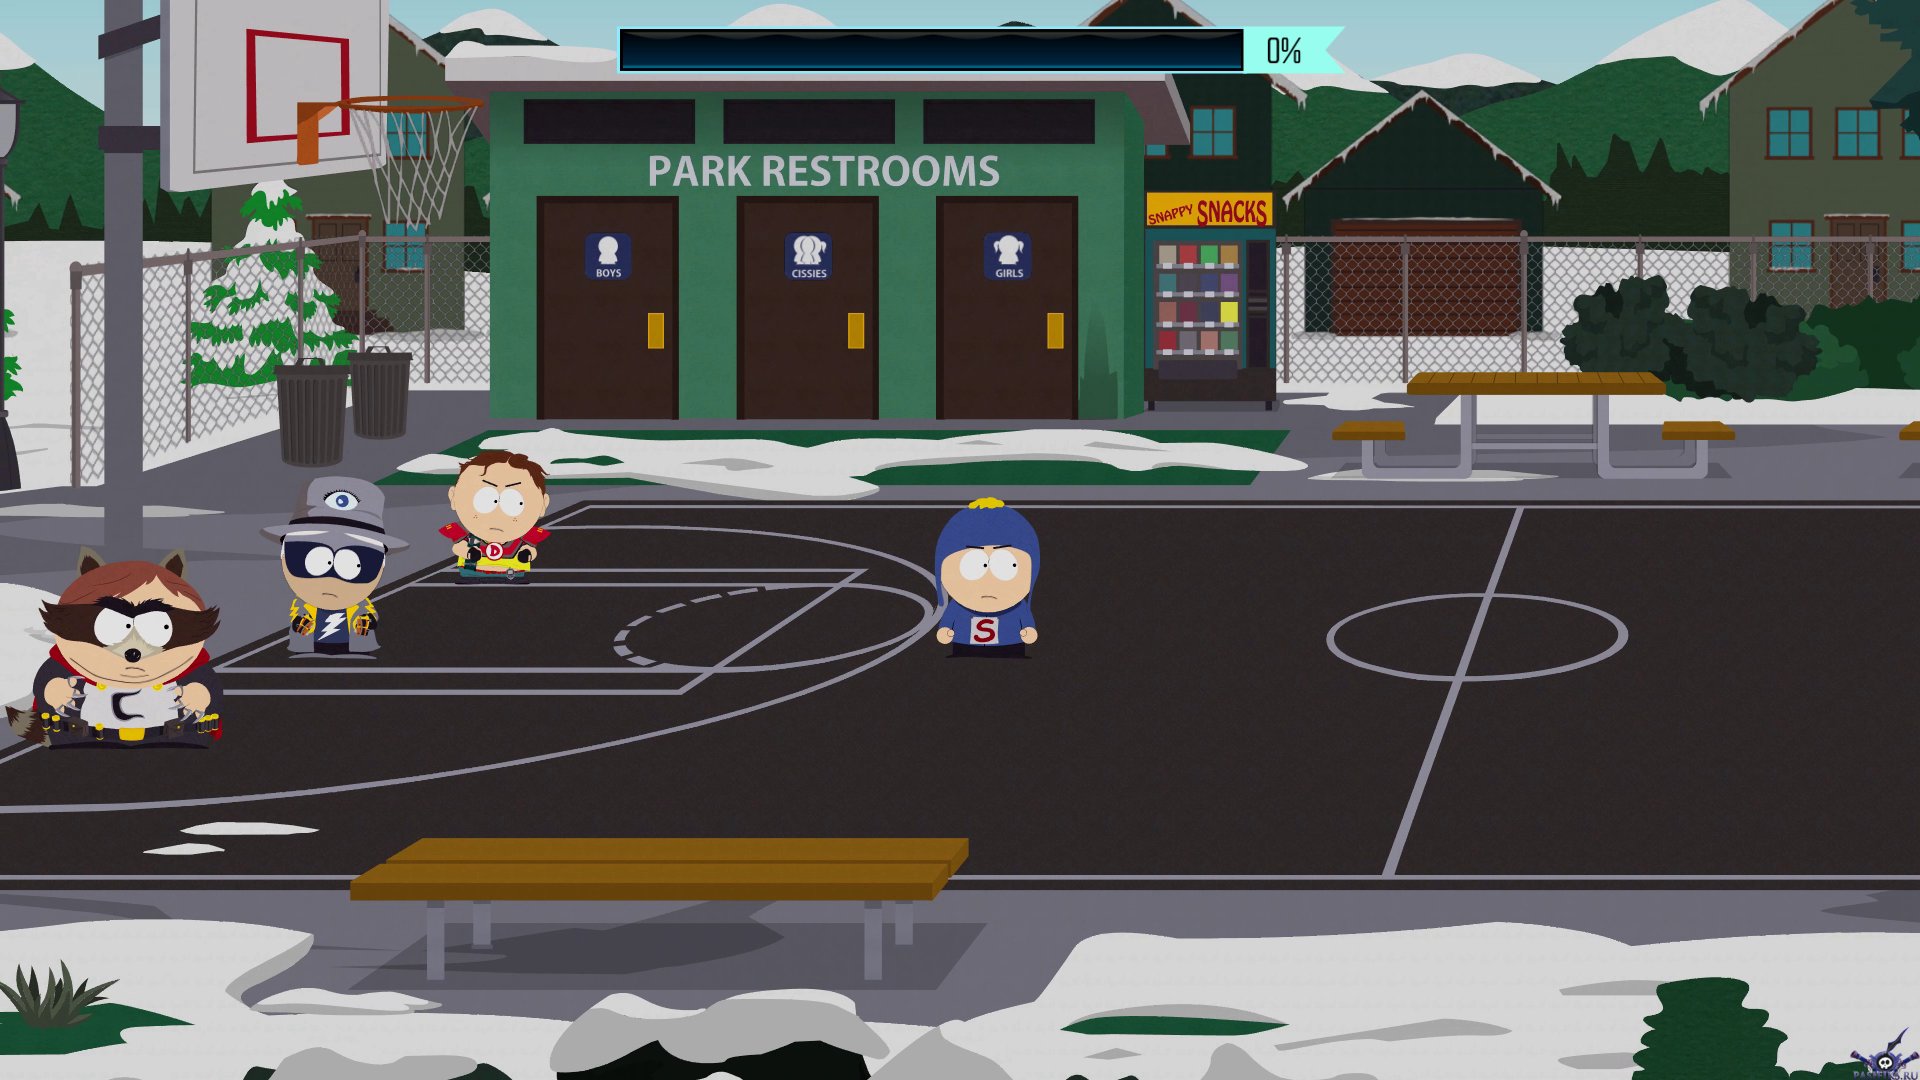 pc-24-south-park-the-fractured-but-whole---nalad-vzaimoponimanie